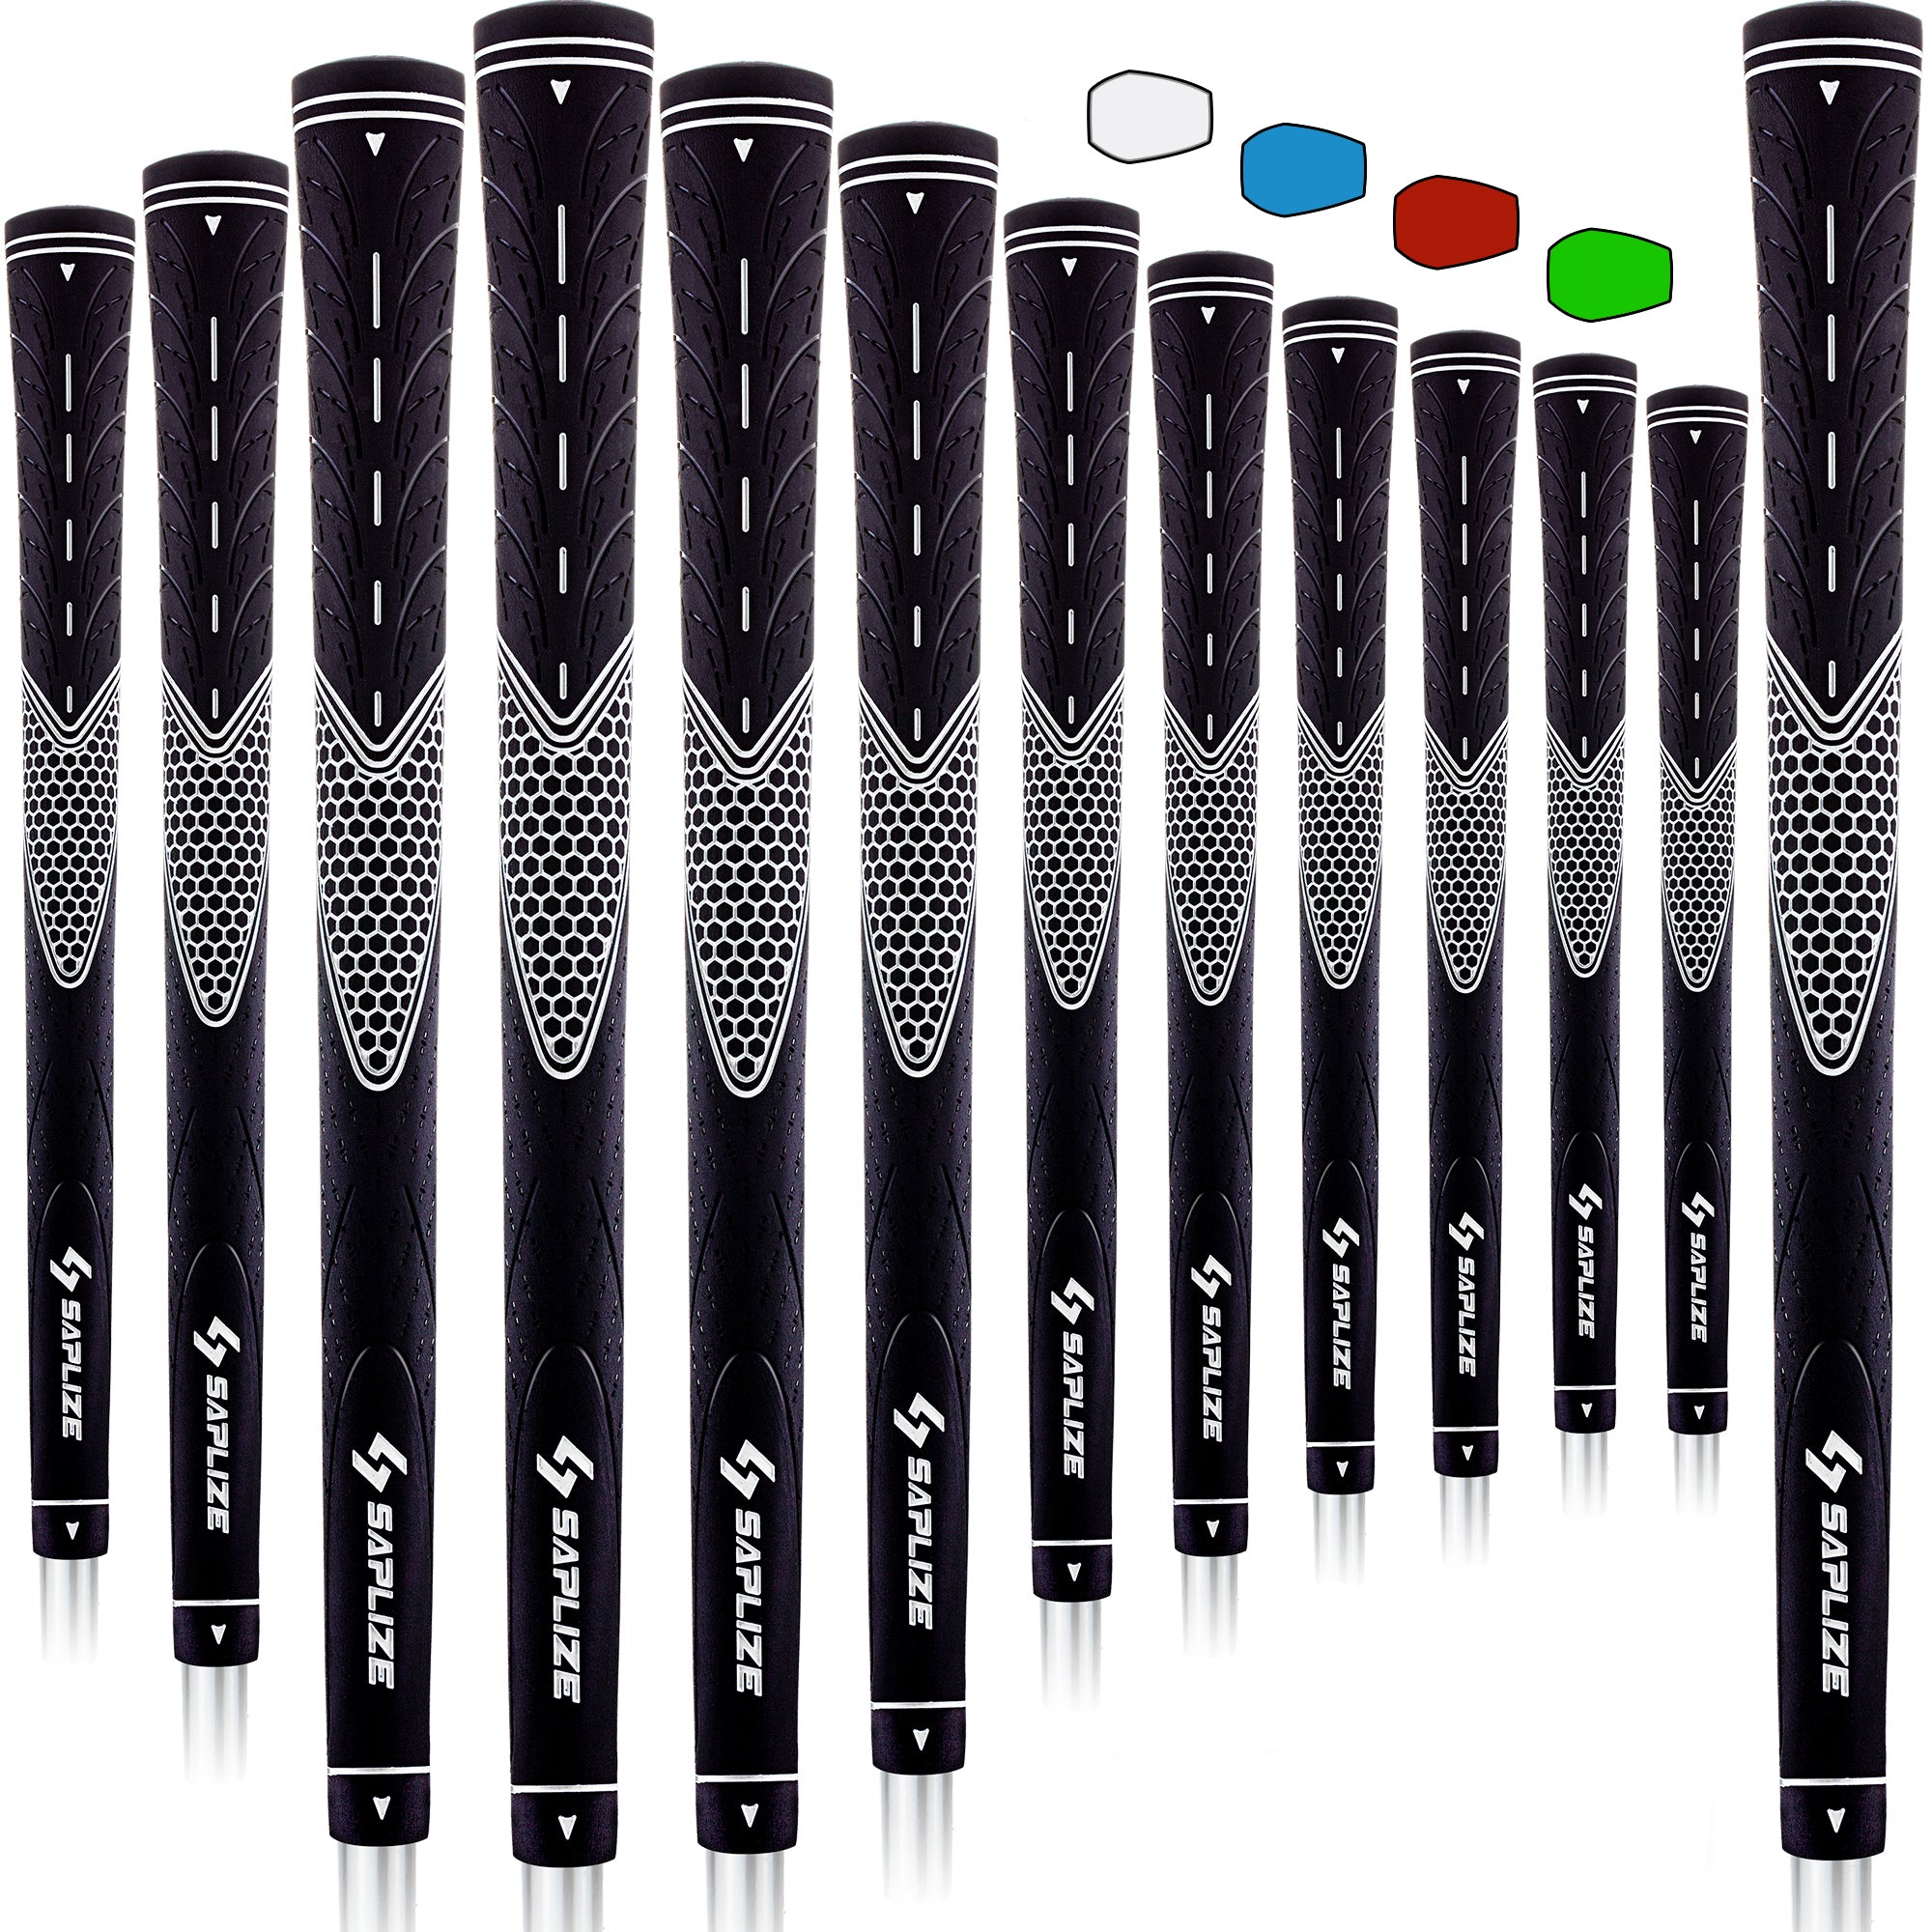 Standard CC01 Rubber Golf Grips for Small Hand